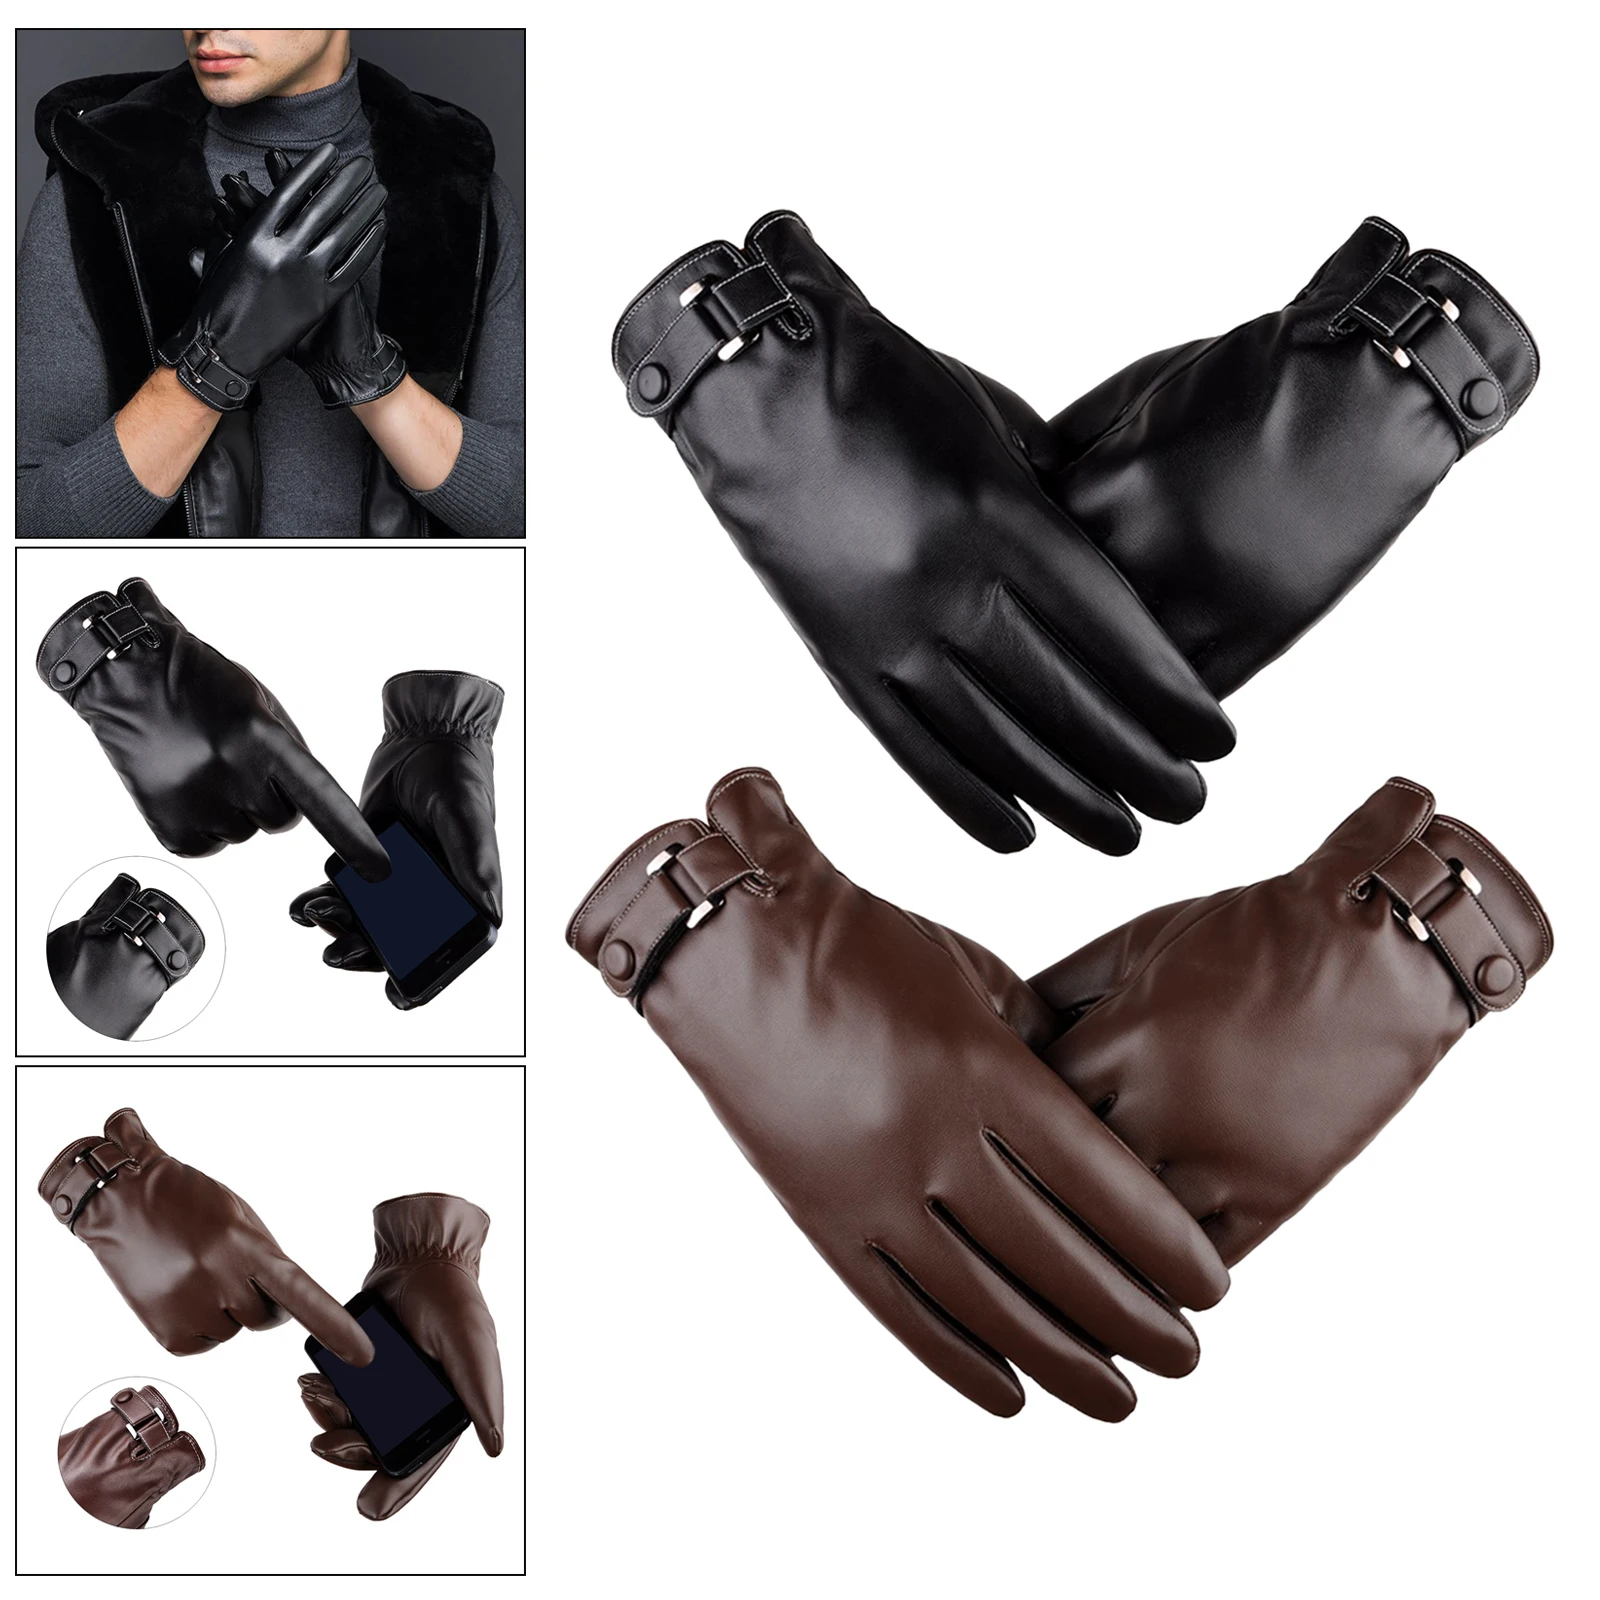 Touch Screen Gloves PU Leather Army Military Combat Outdoor Sport Cycling Paintball Hunting Swat